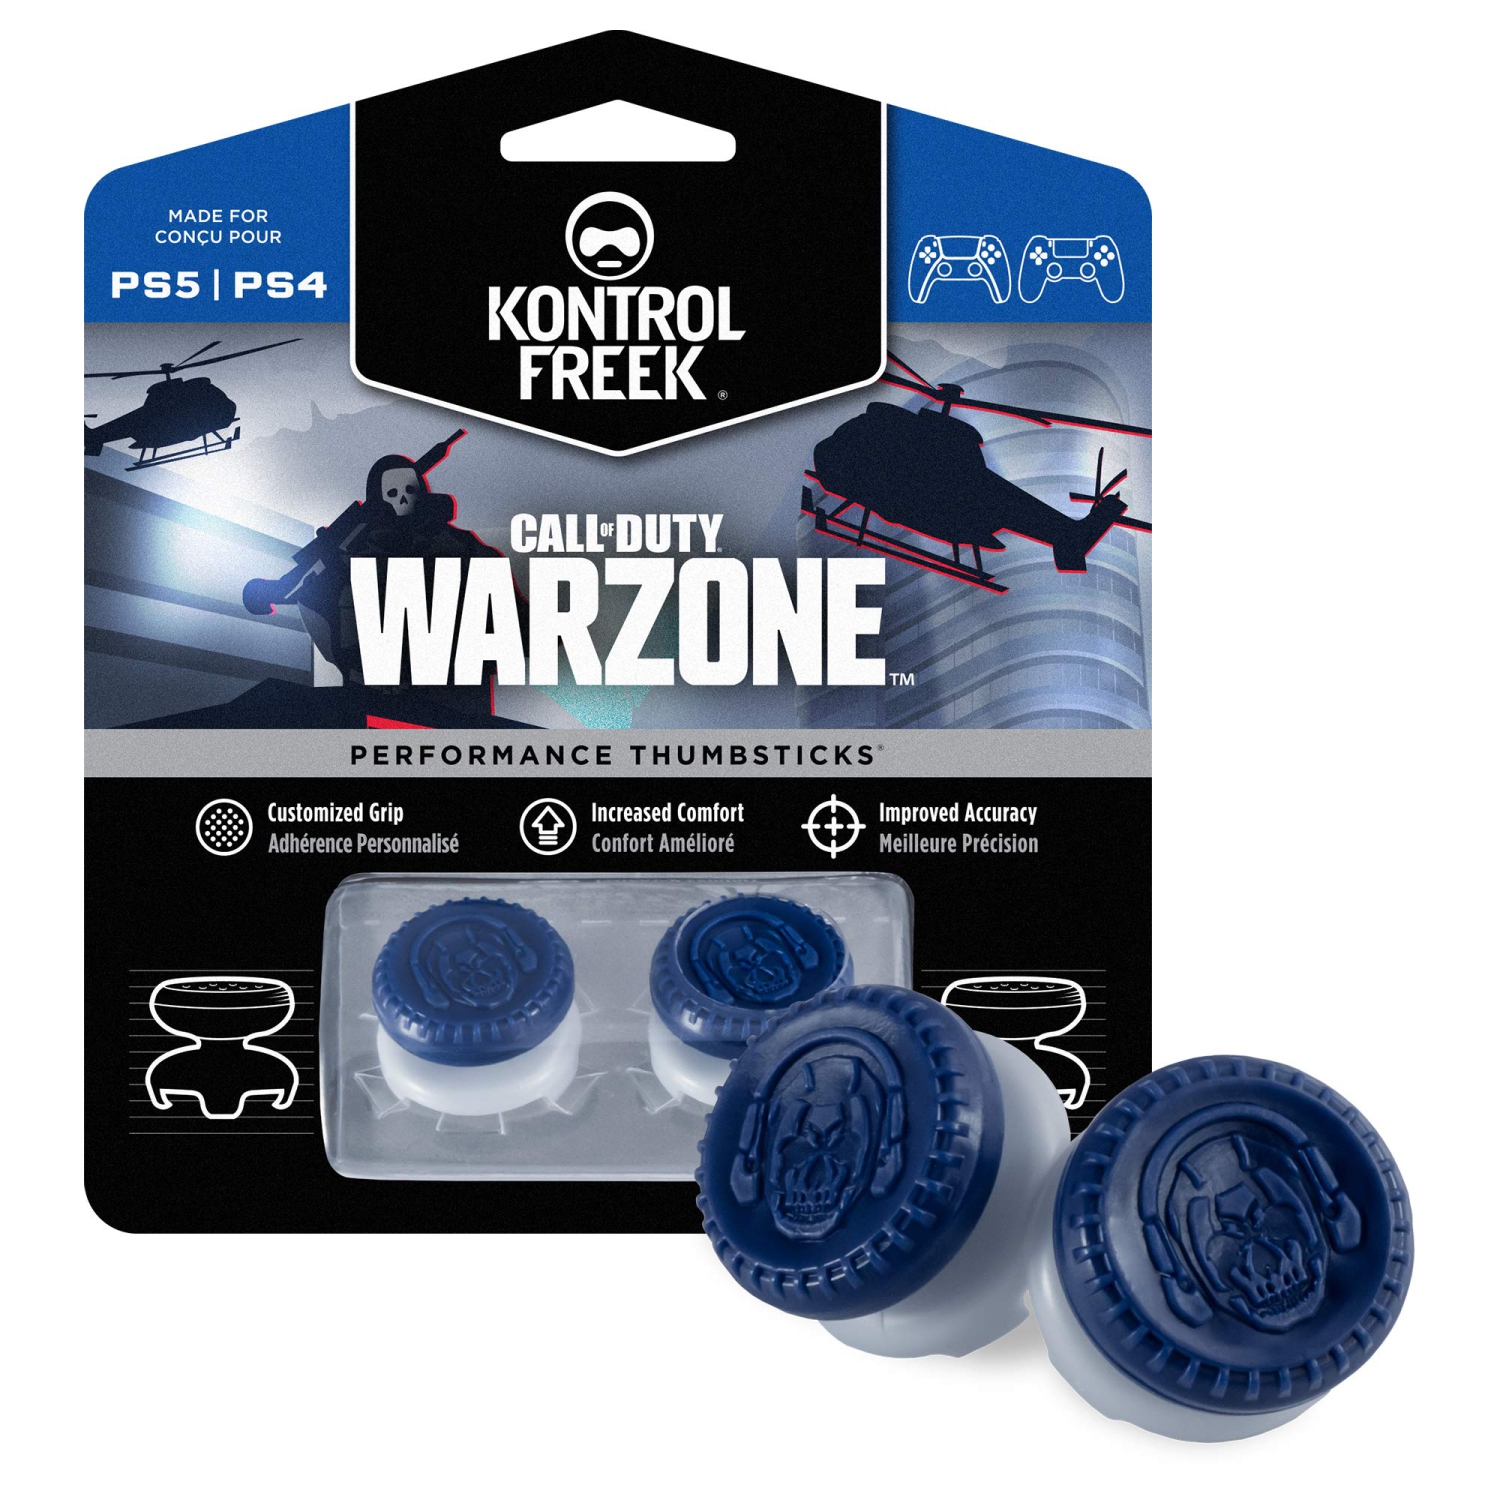 KontrolFreek Call of Duty: Warzone Performance Thumbsticks for Playstation 4 (PS4) and Playstation 5 (PS5) | 2 High-Rise, Hy